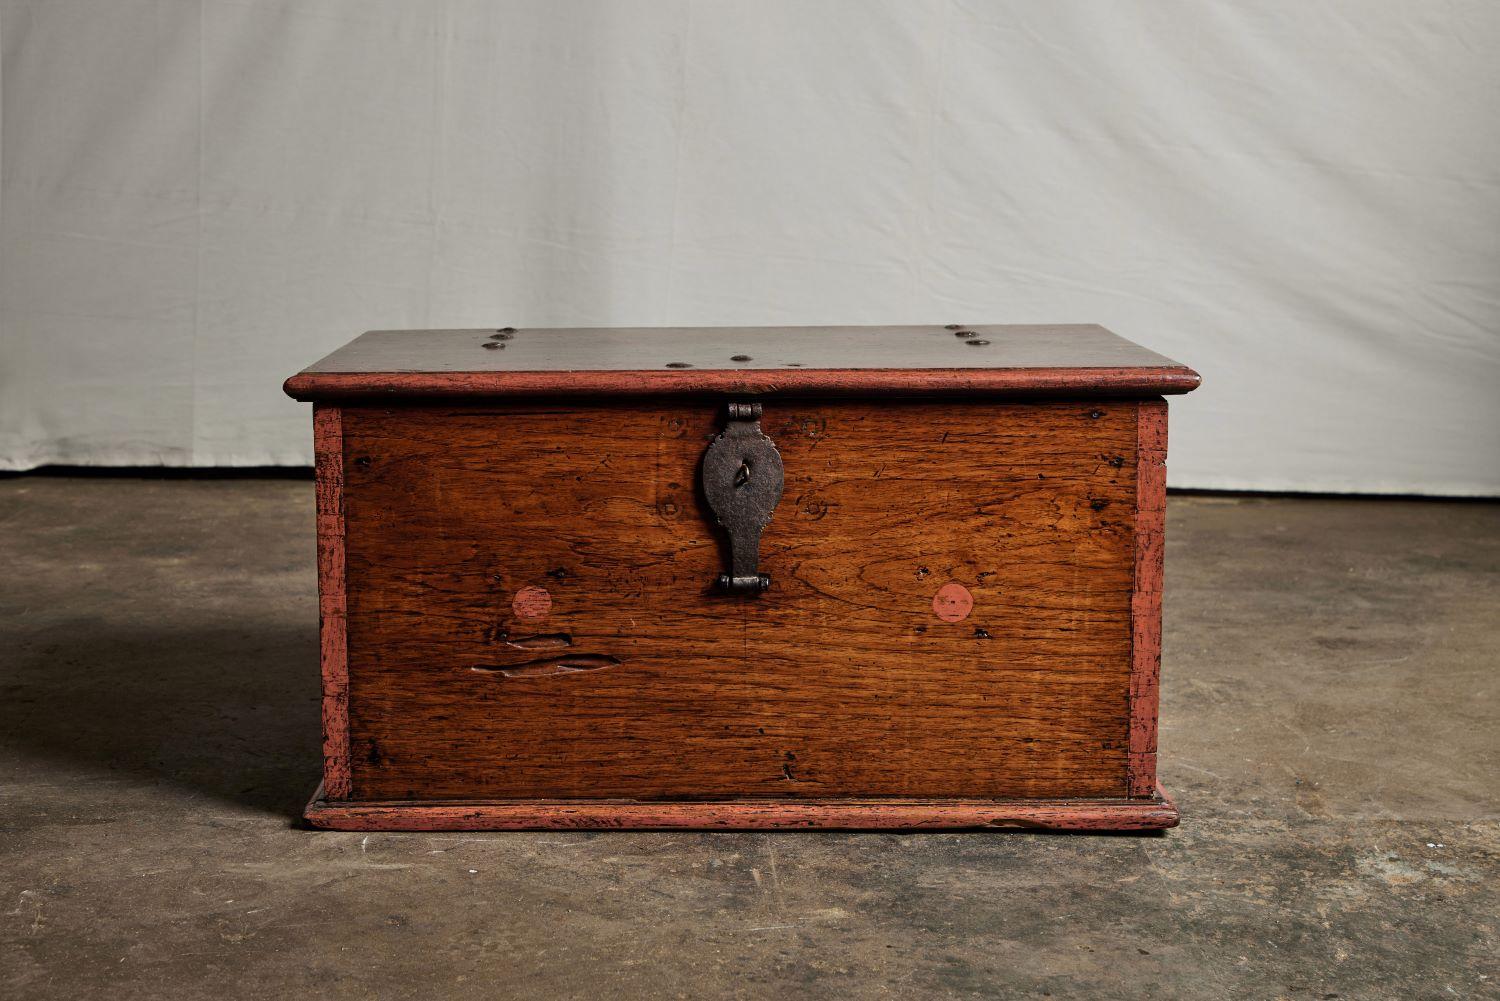 A mid-19th century Indonesian teak trunk with painted detailing.